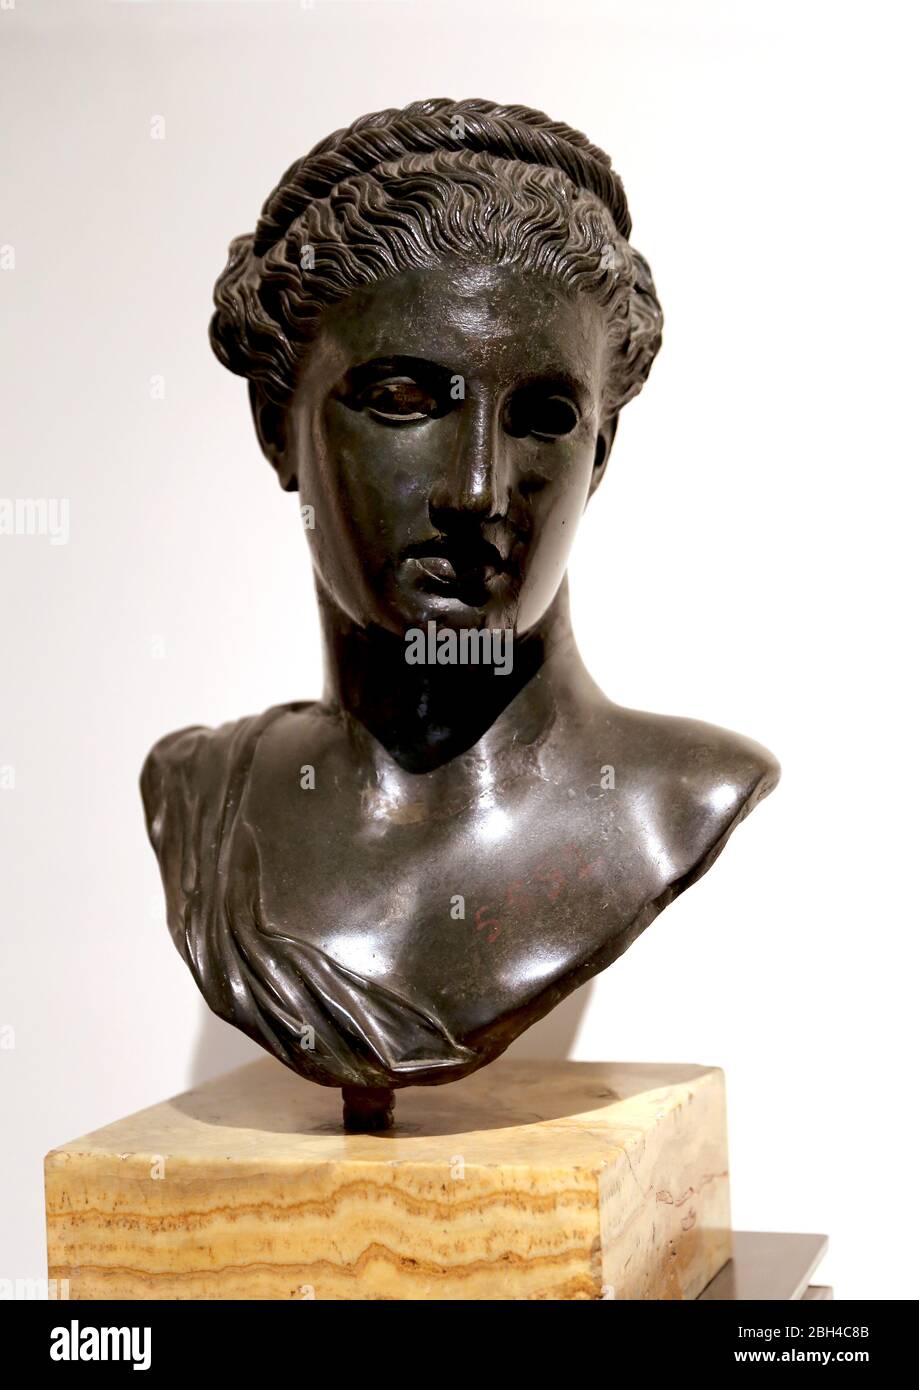 Bust of Berenice or Artemis, Roman bronze. 1st cent. BC. Villa of Papiry, Herculaneum. Archaeological Museum of Naples, Italy. Stock Photo